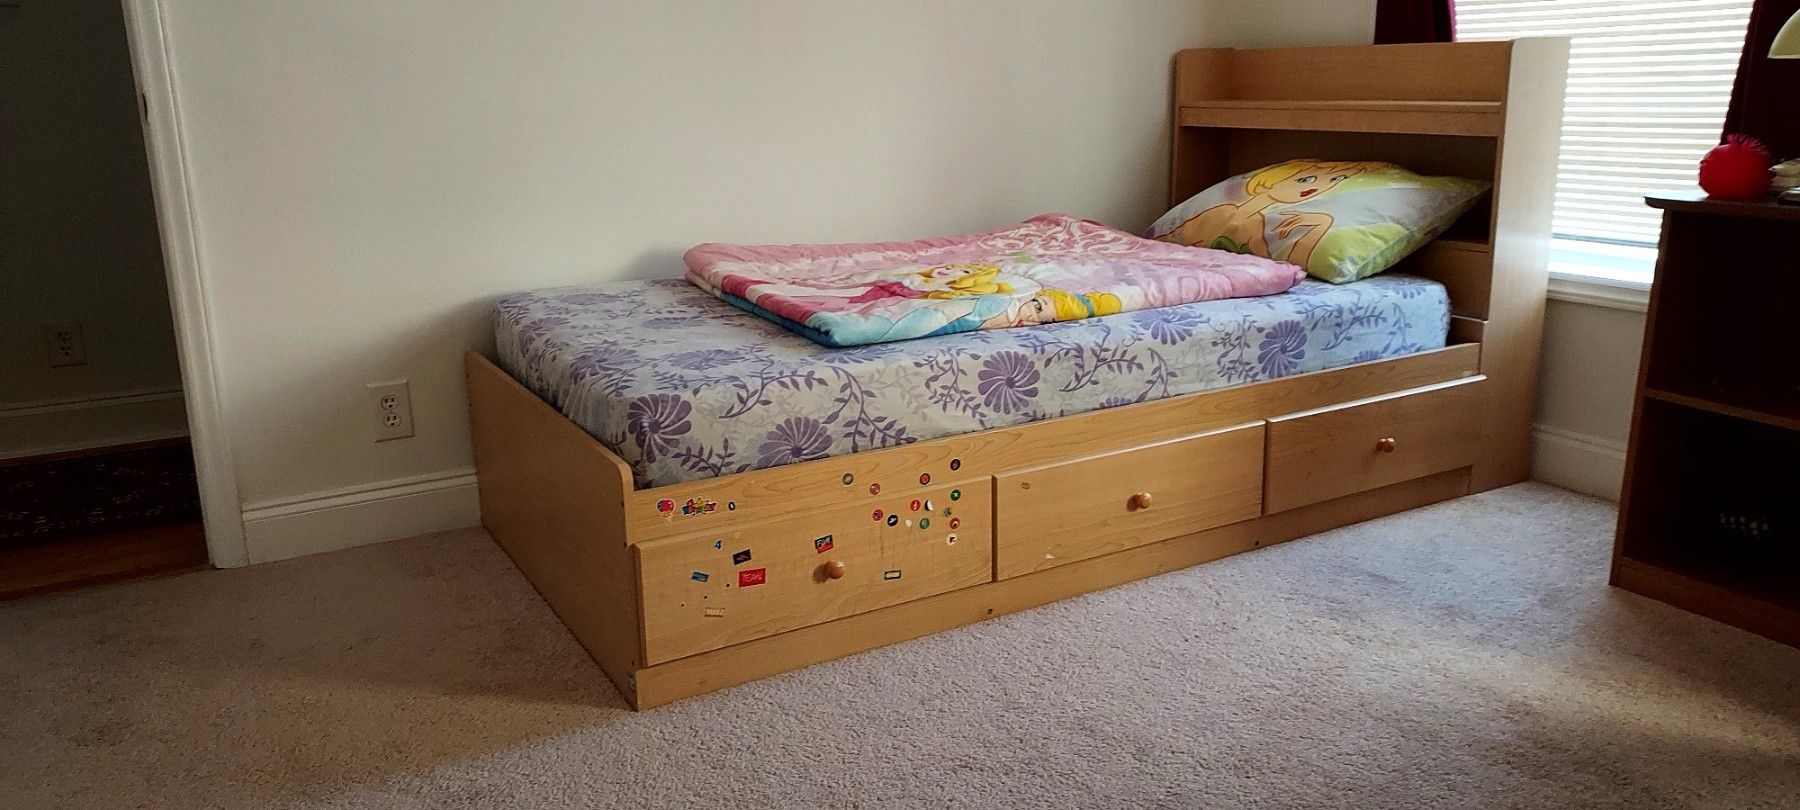  Twin size bed with storage. Mattress and sheet included. 